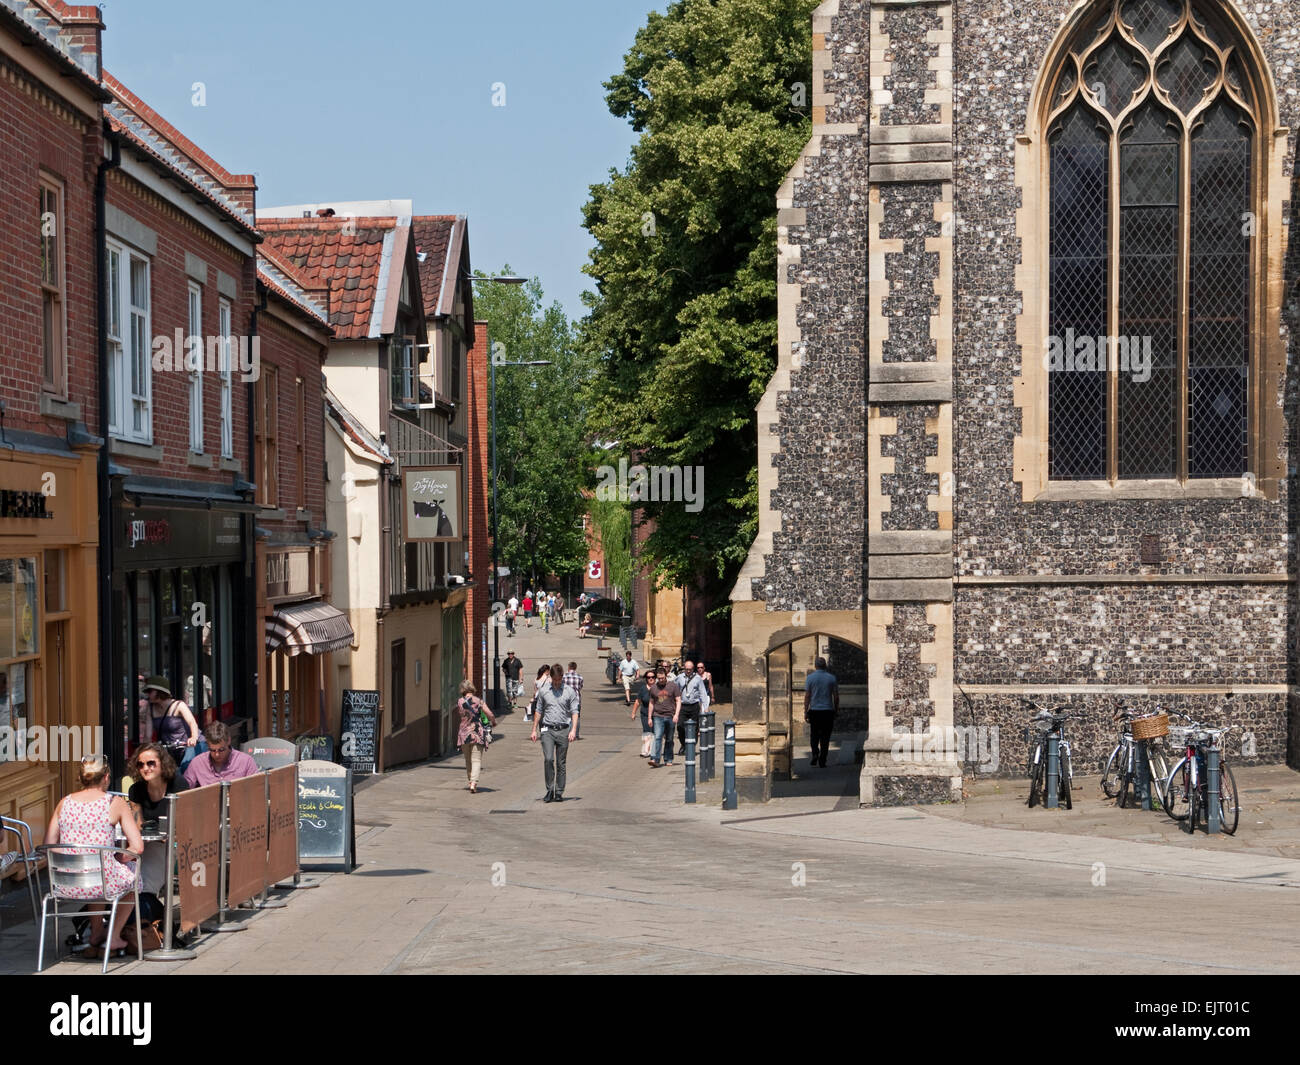 Cafe Culture and Street Scene in the St Andrews area of Norwich, Norfolk, England Stock Photo